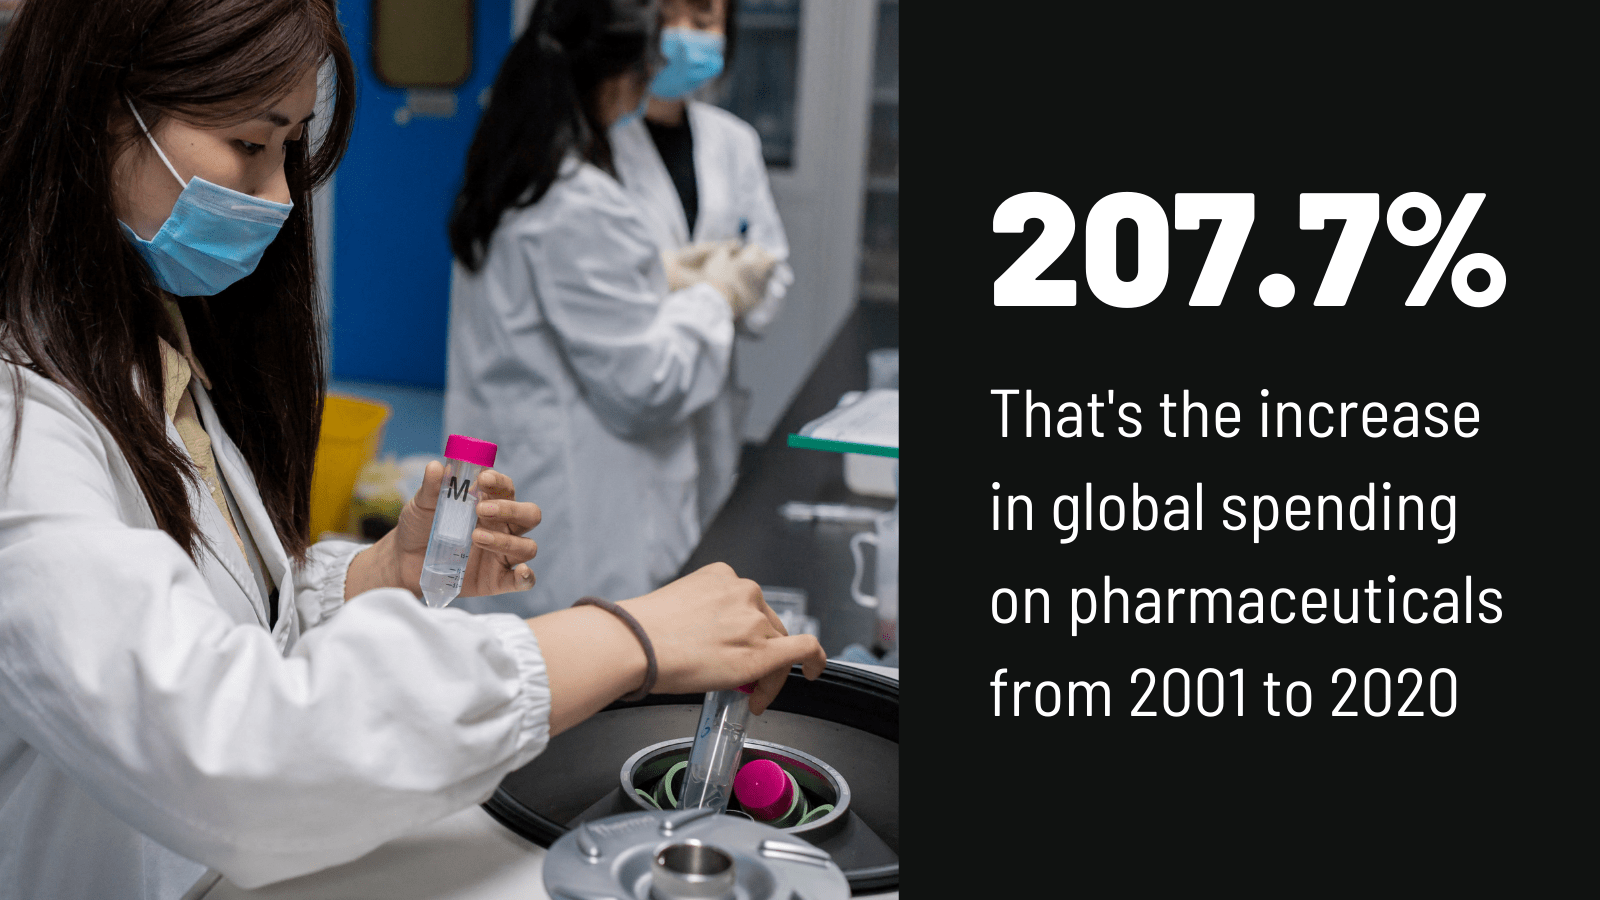 Global spending on pharmaceuticals has increased 207.7% from 2001 to 2020